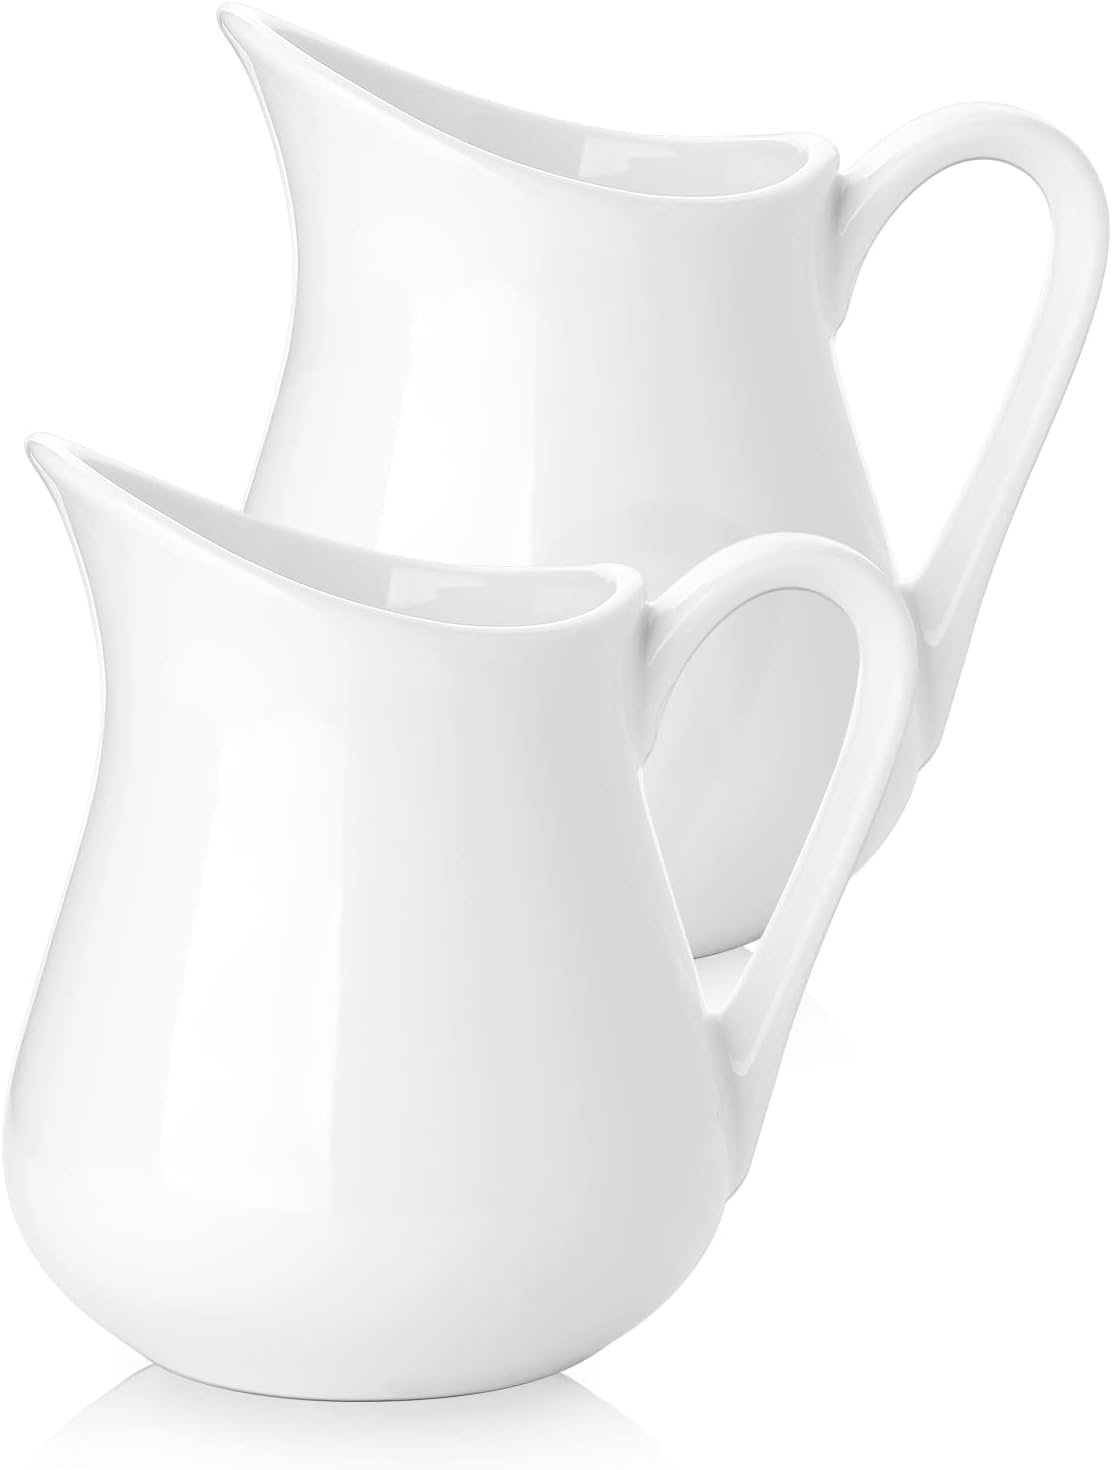 4.5 oz Small Creamer Pitcher, Classic White Porcelain Creamer with Handle,  Coffee Creamer Container, Ceramic Maple Syrup Dispenser for Milk Sauce